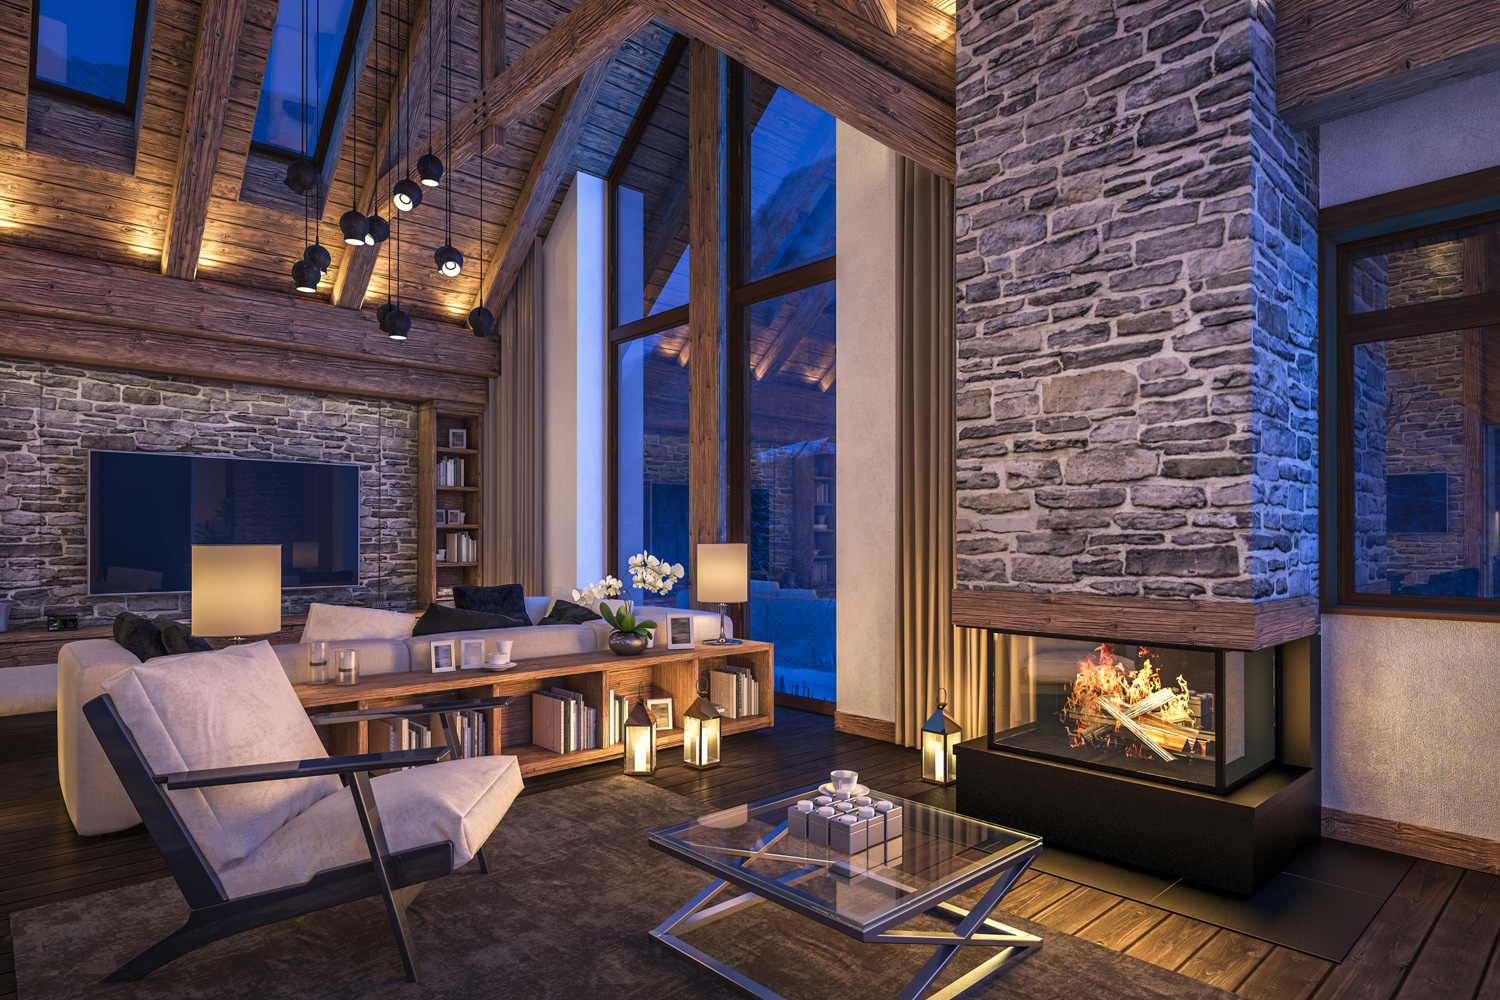 rendering of cozy living room on cold winter night in the mountains, evening interior of chalet decorated with candles, fireplace fills the room with warmth.